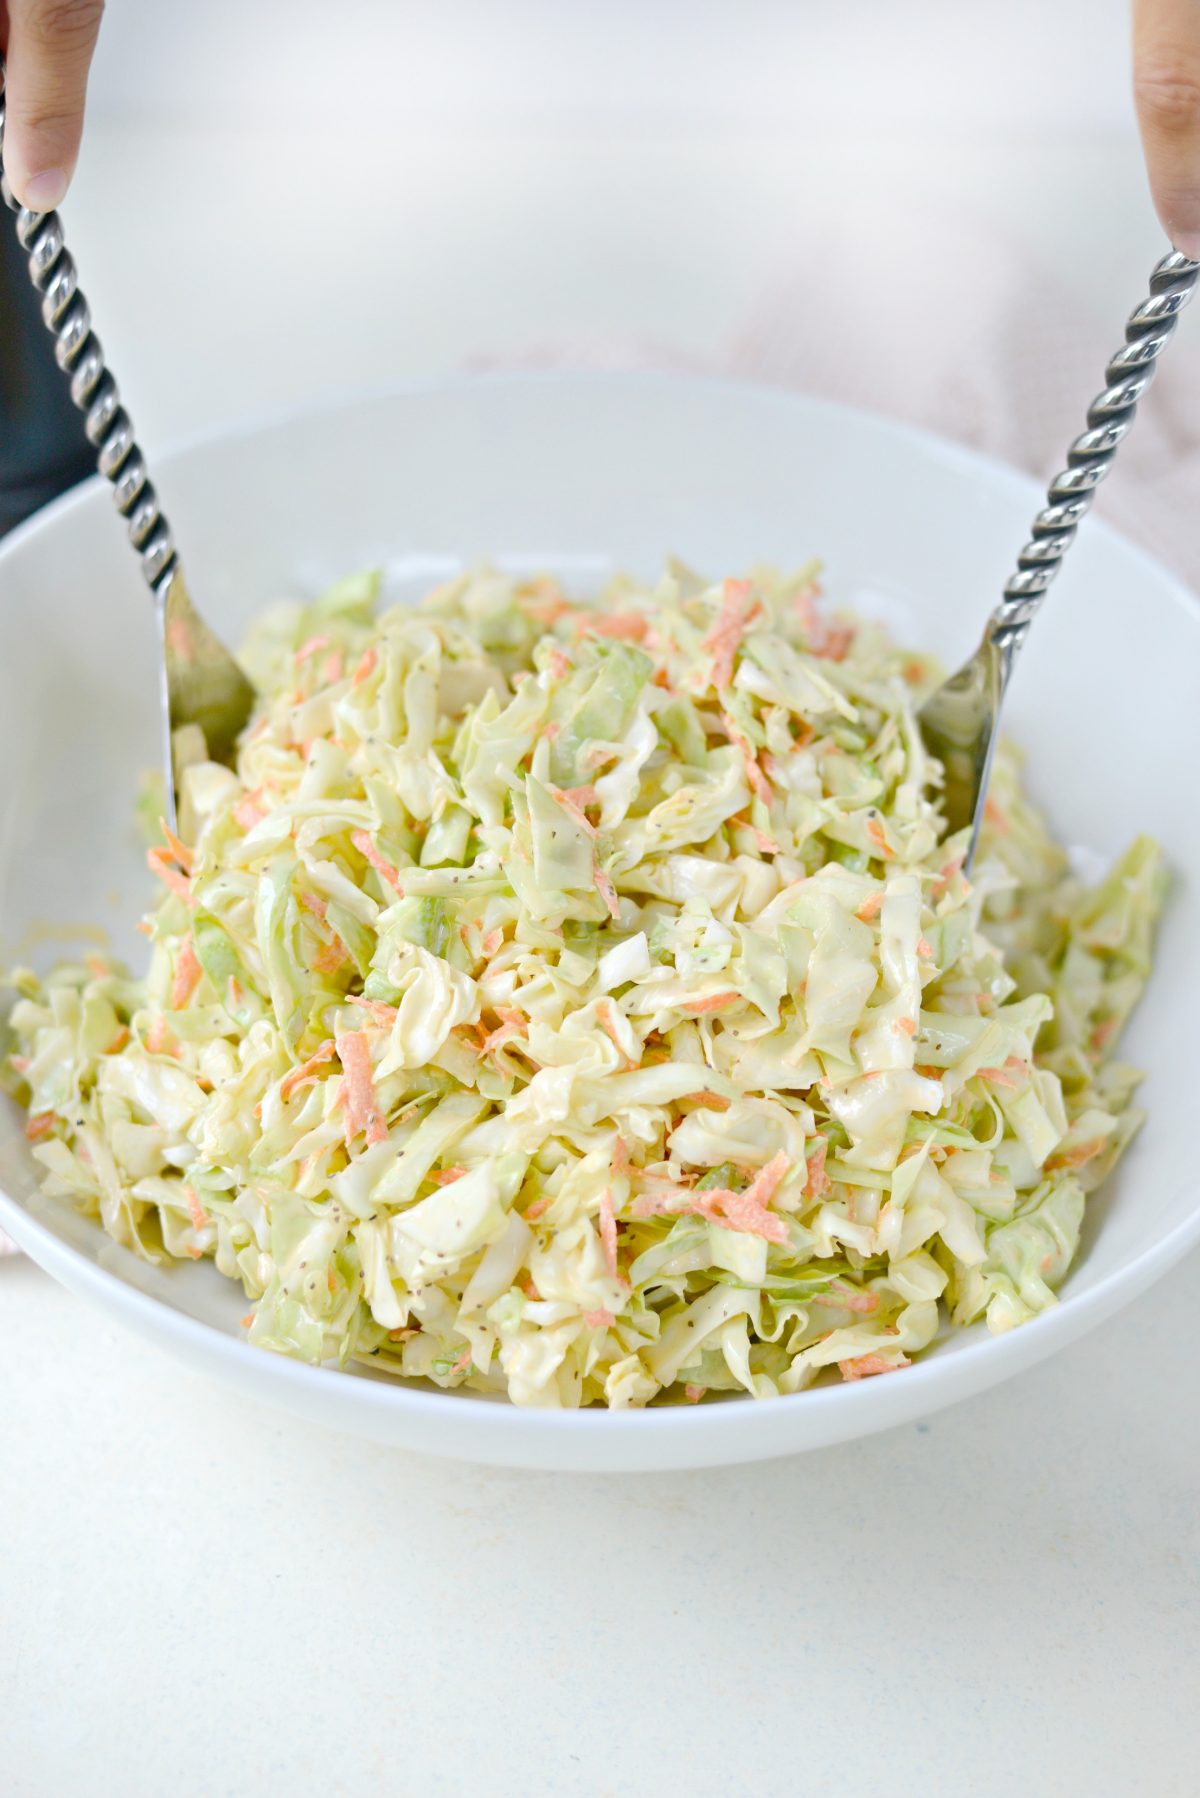 Classic Coleslaw Recipe with Homemade Dressing l SimplyScratch.com (14)